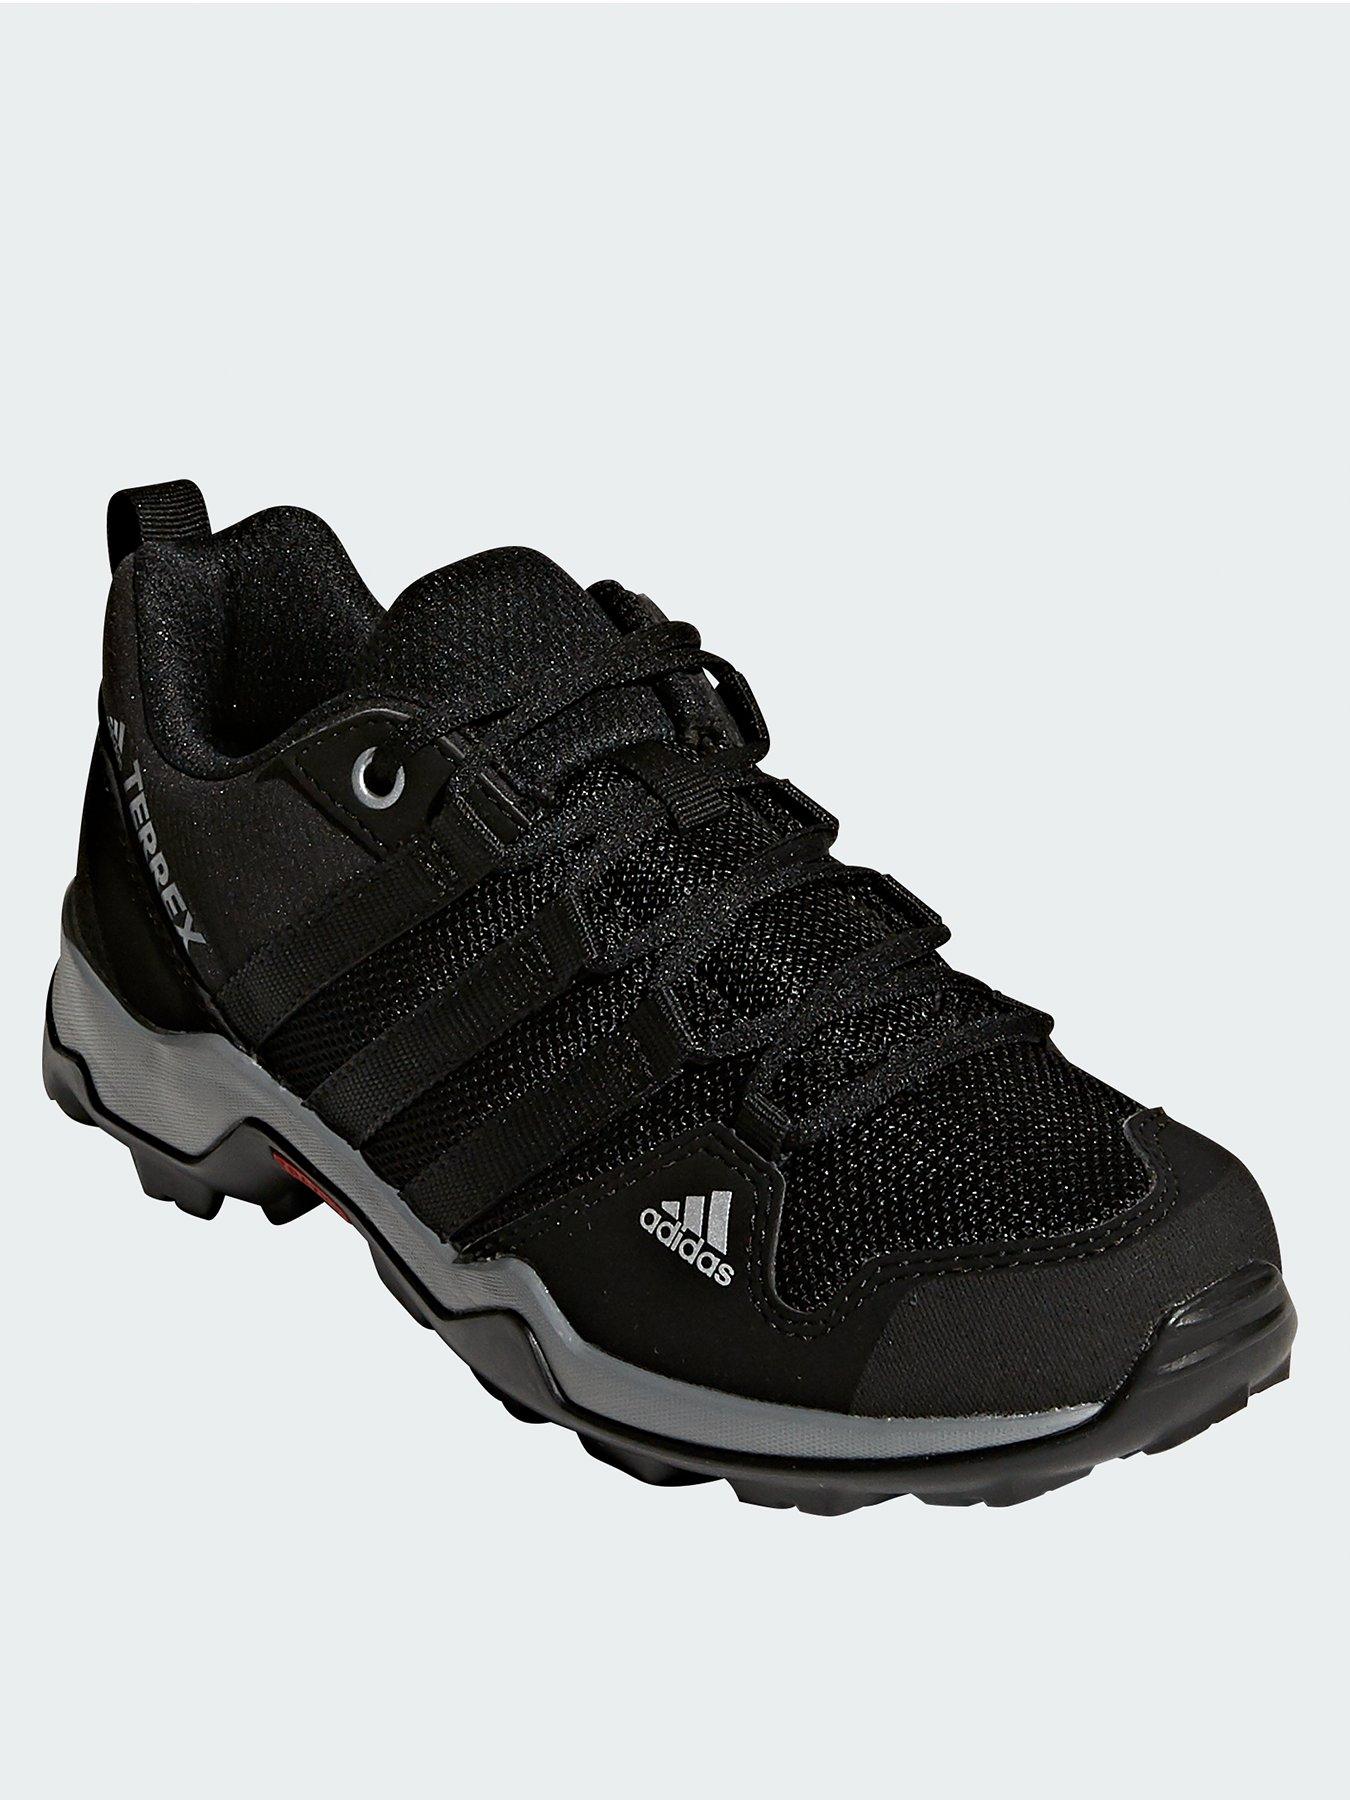 4 | All Black Friday Deals | Offers | | Outdoor | Adidas | & baby sports shoes | Sports & leisure | www.very.co.uk